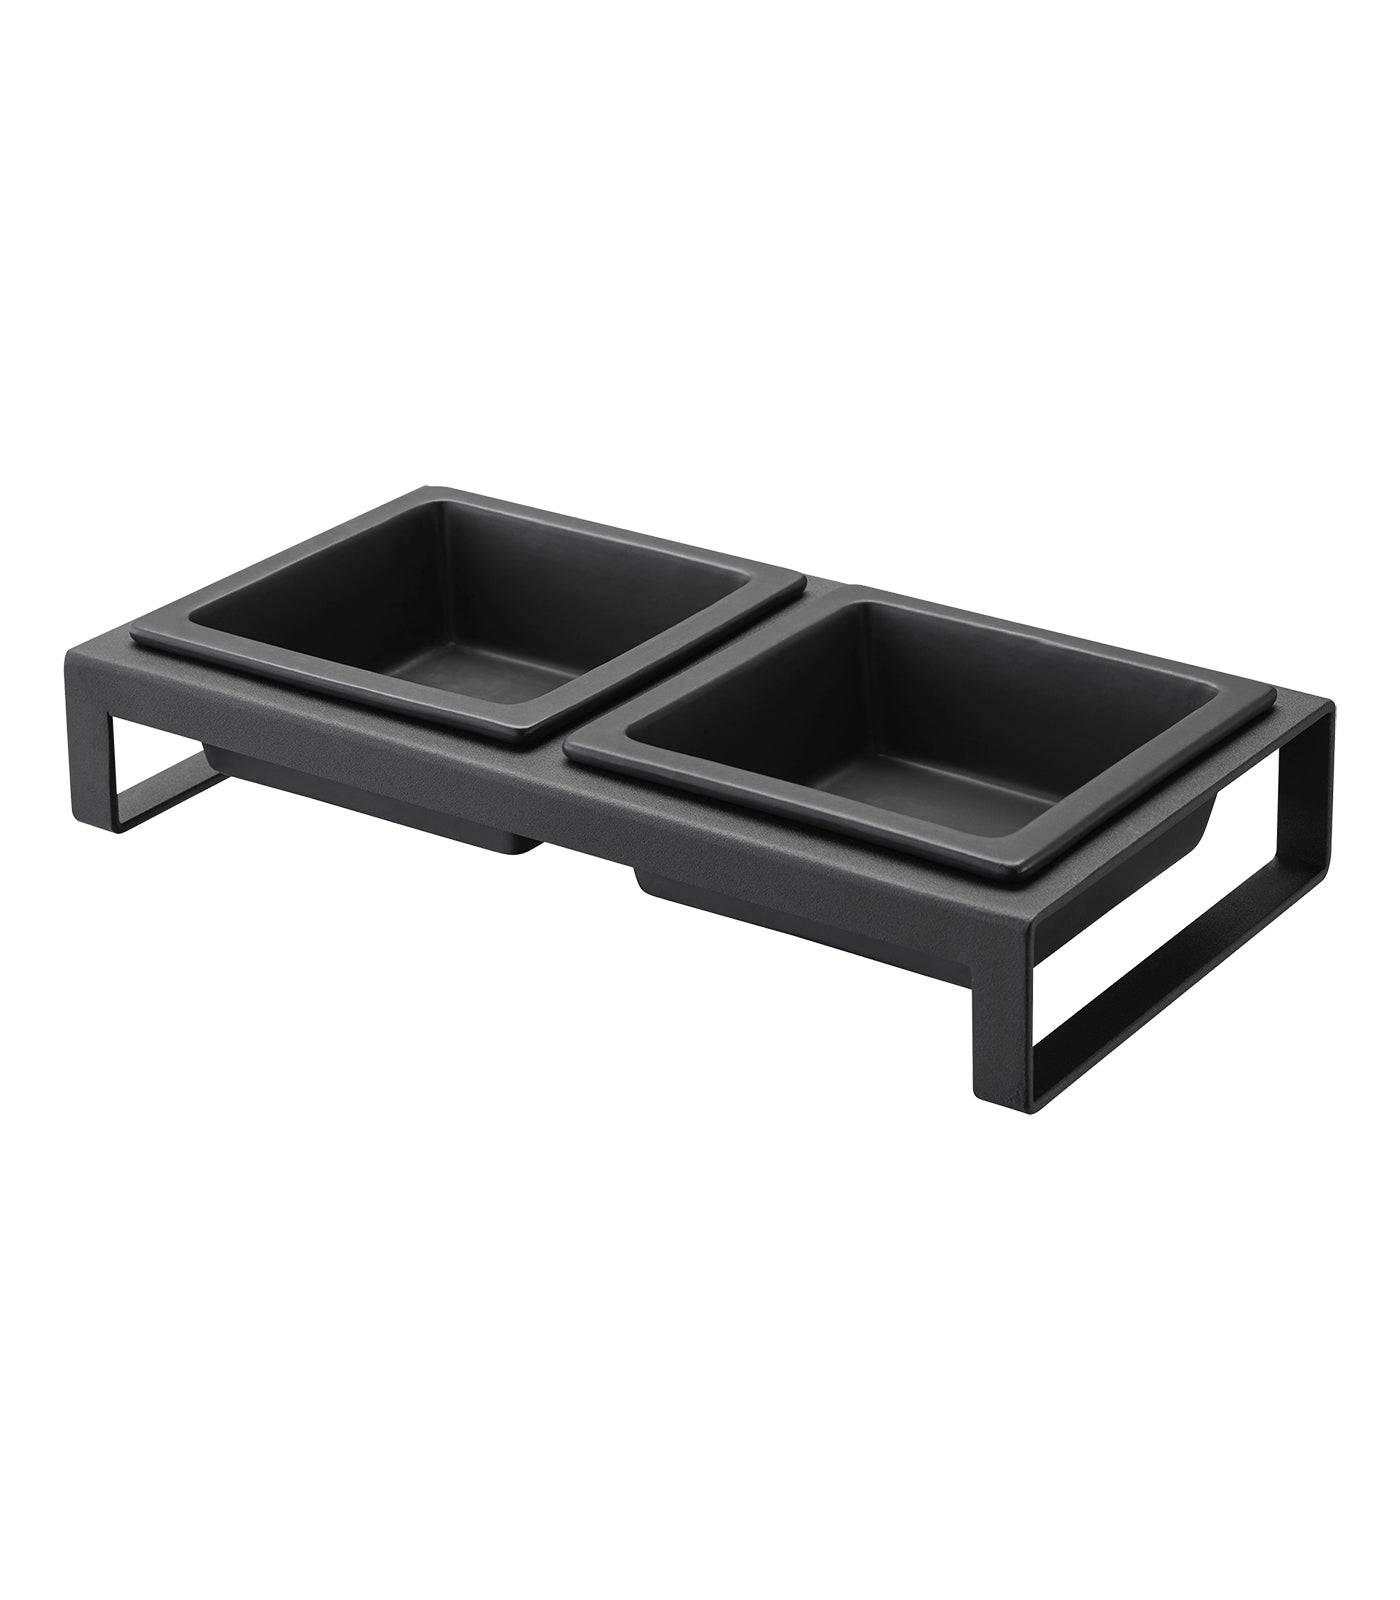 Black dual-compartment Yamazaki Home pet food bowl with integrated handles.